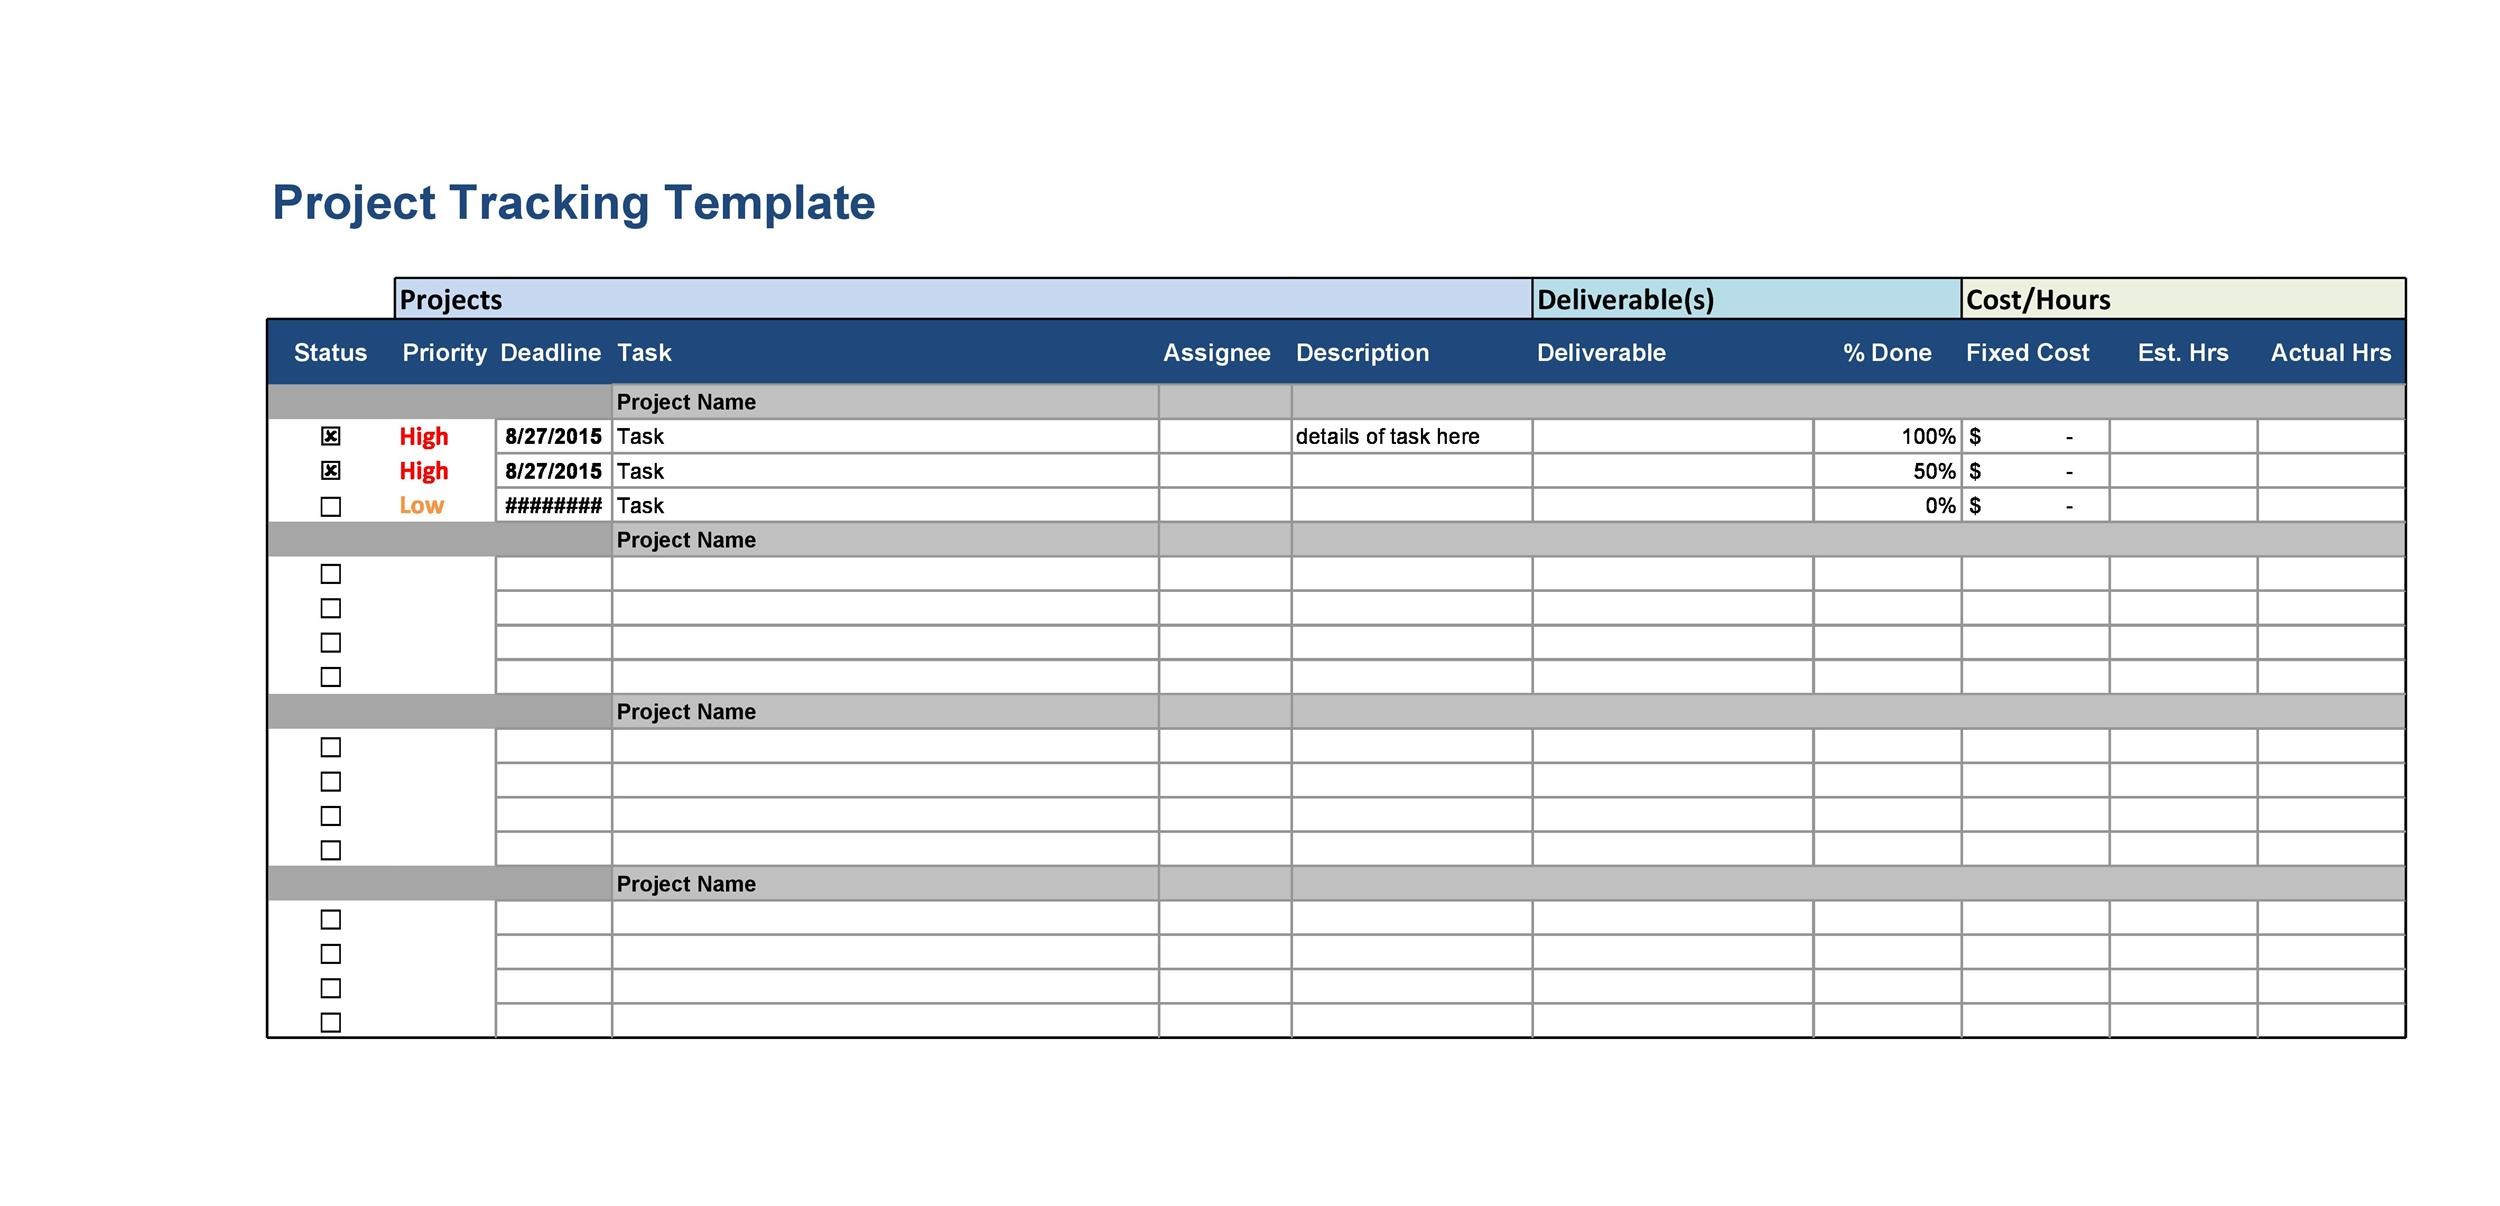 habit-tracker-template-excel-free-printable-templates